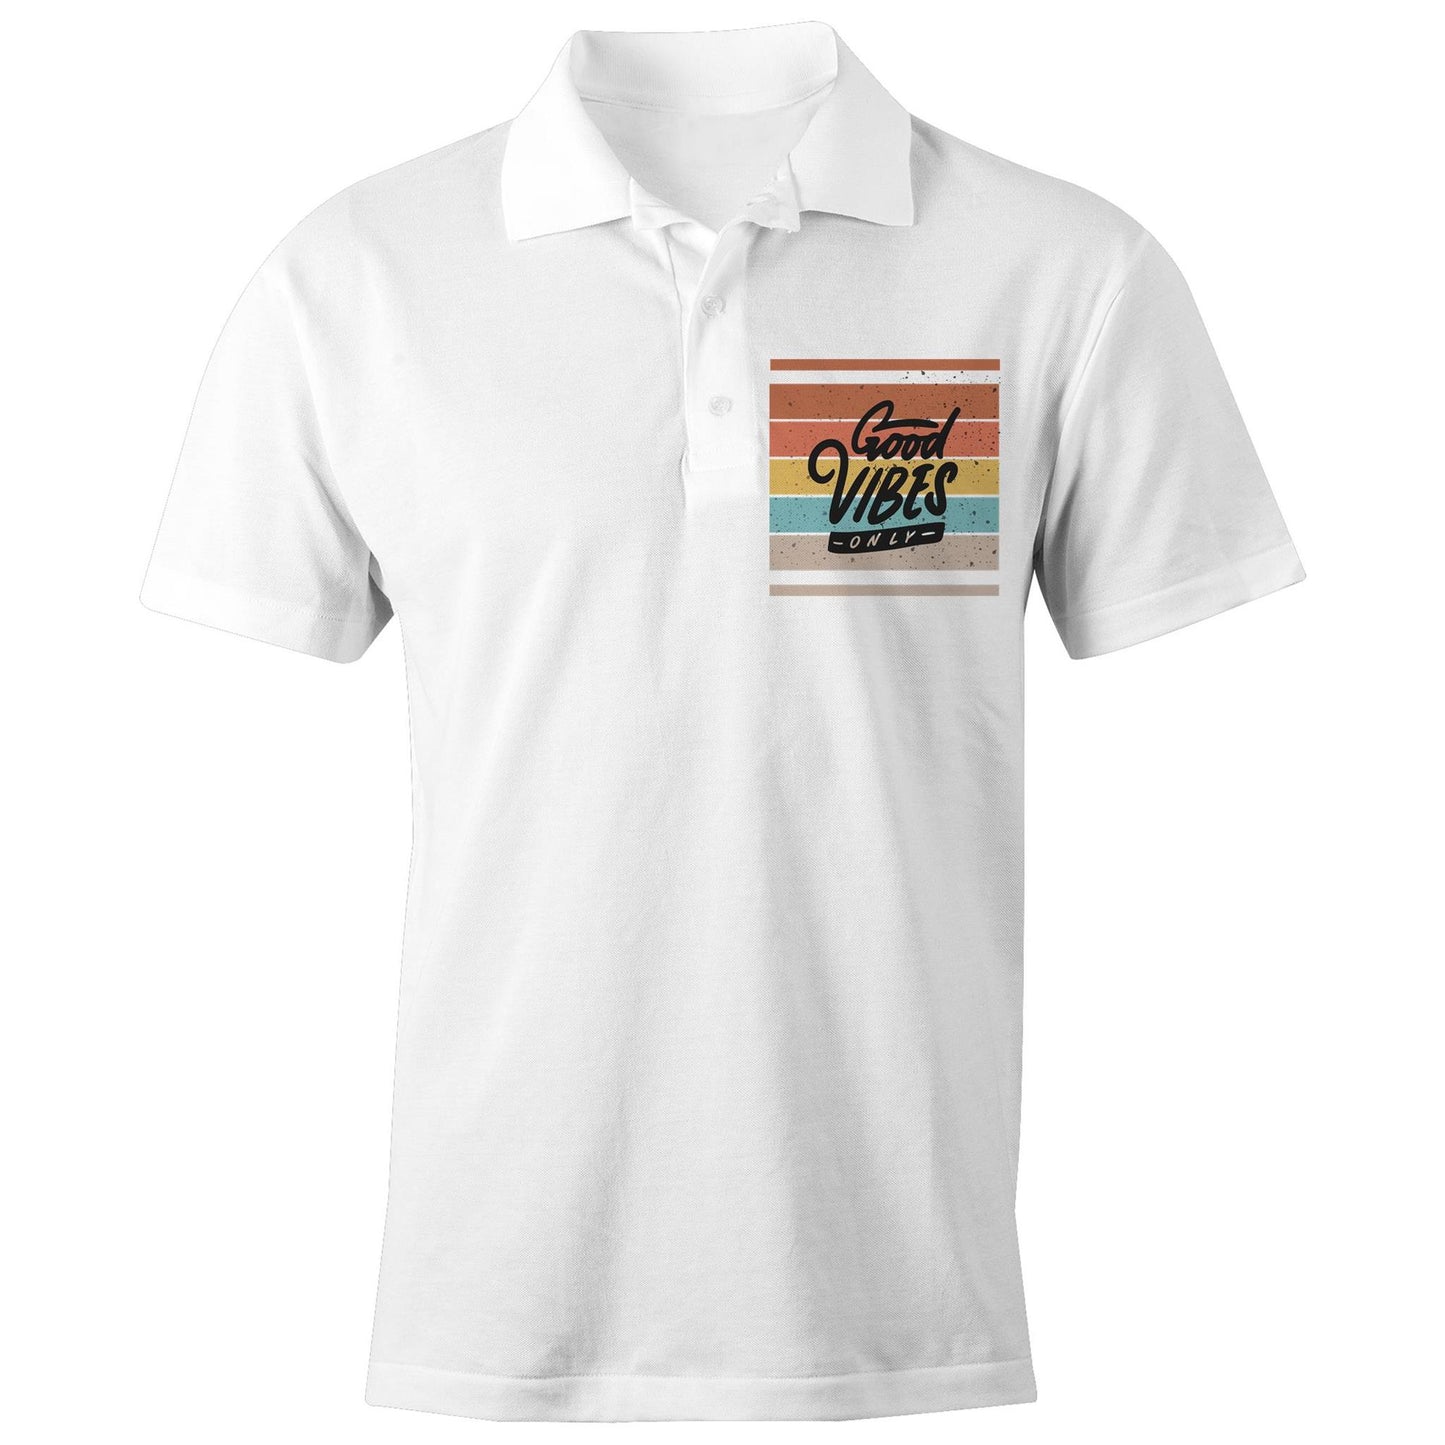 Good Vibes Only - Chad S/S Polo Shirt, Printed White Polo Shirt Motivation Retro